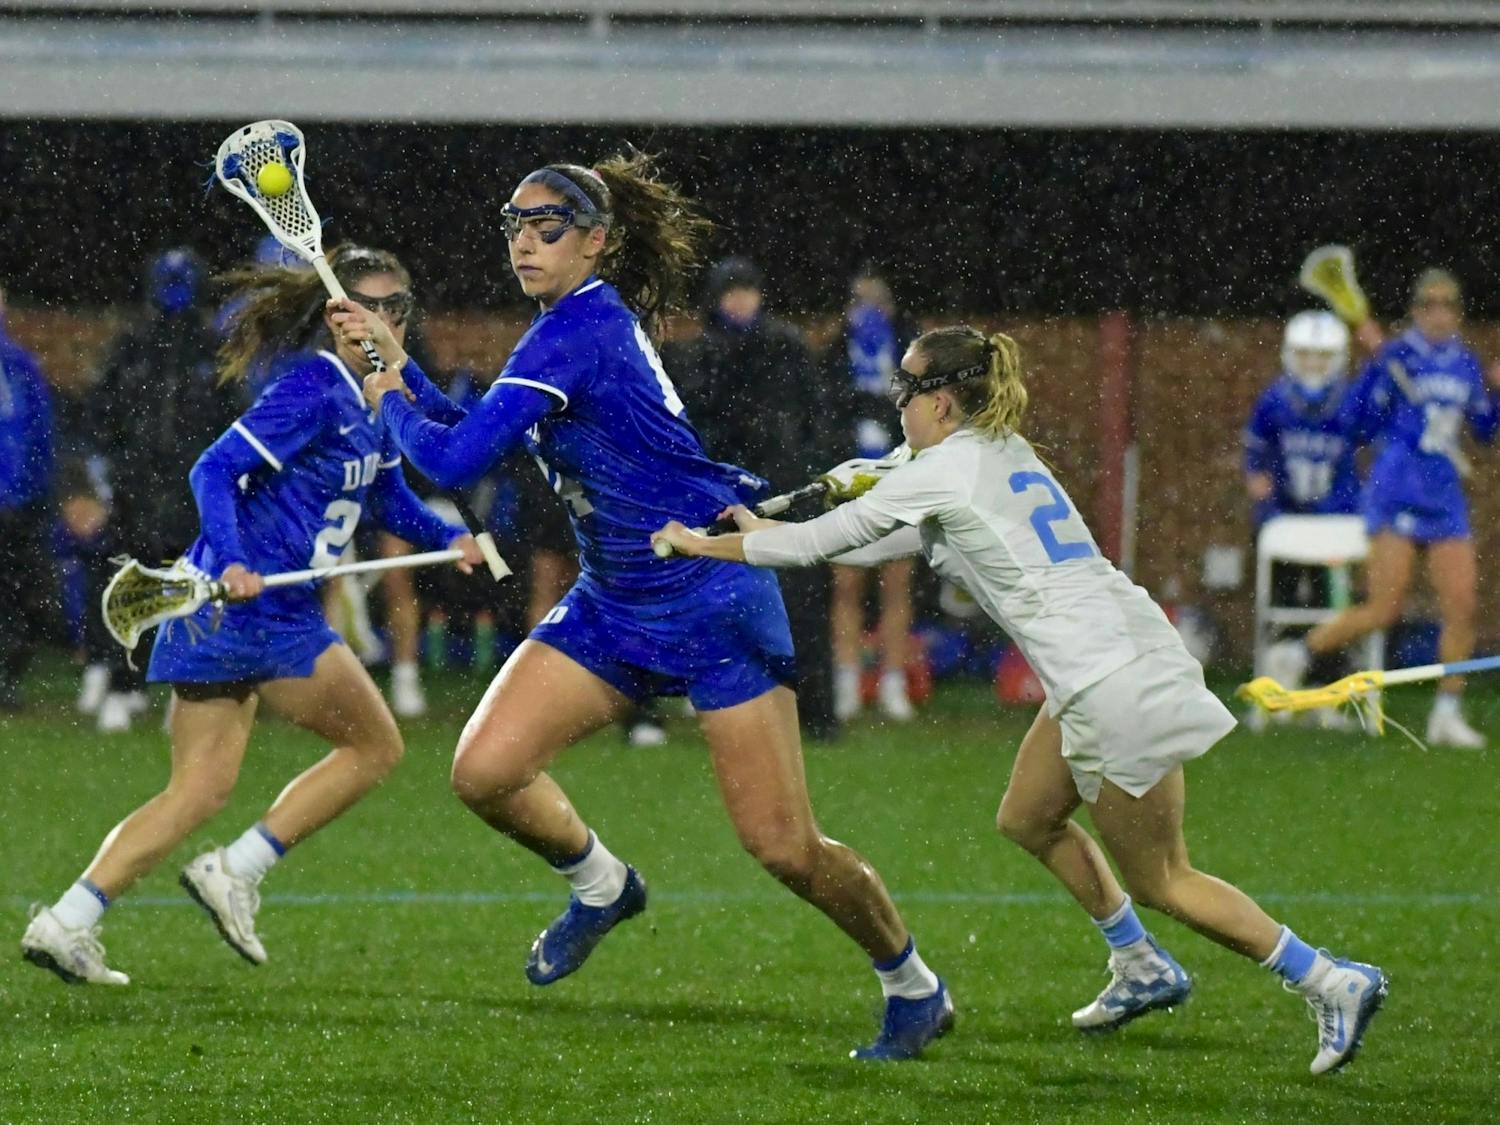 Duke and North Carolina braved heavy rain and bitter cold in their first meeting of the season Friday night.